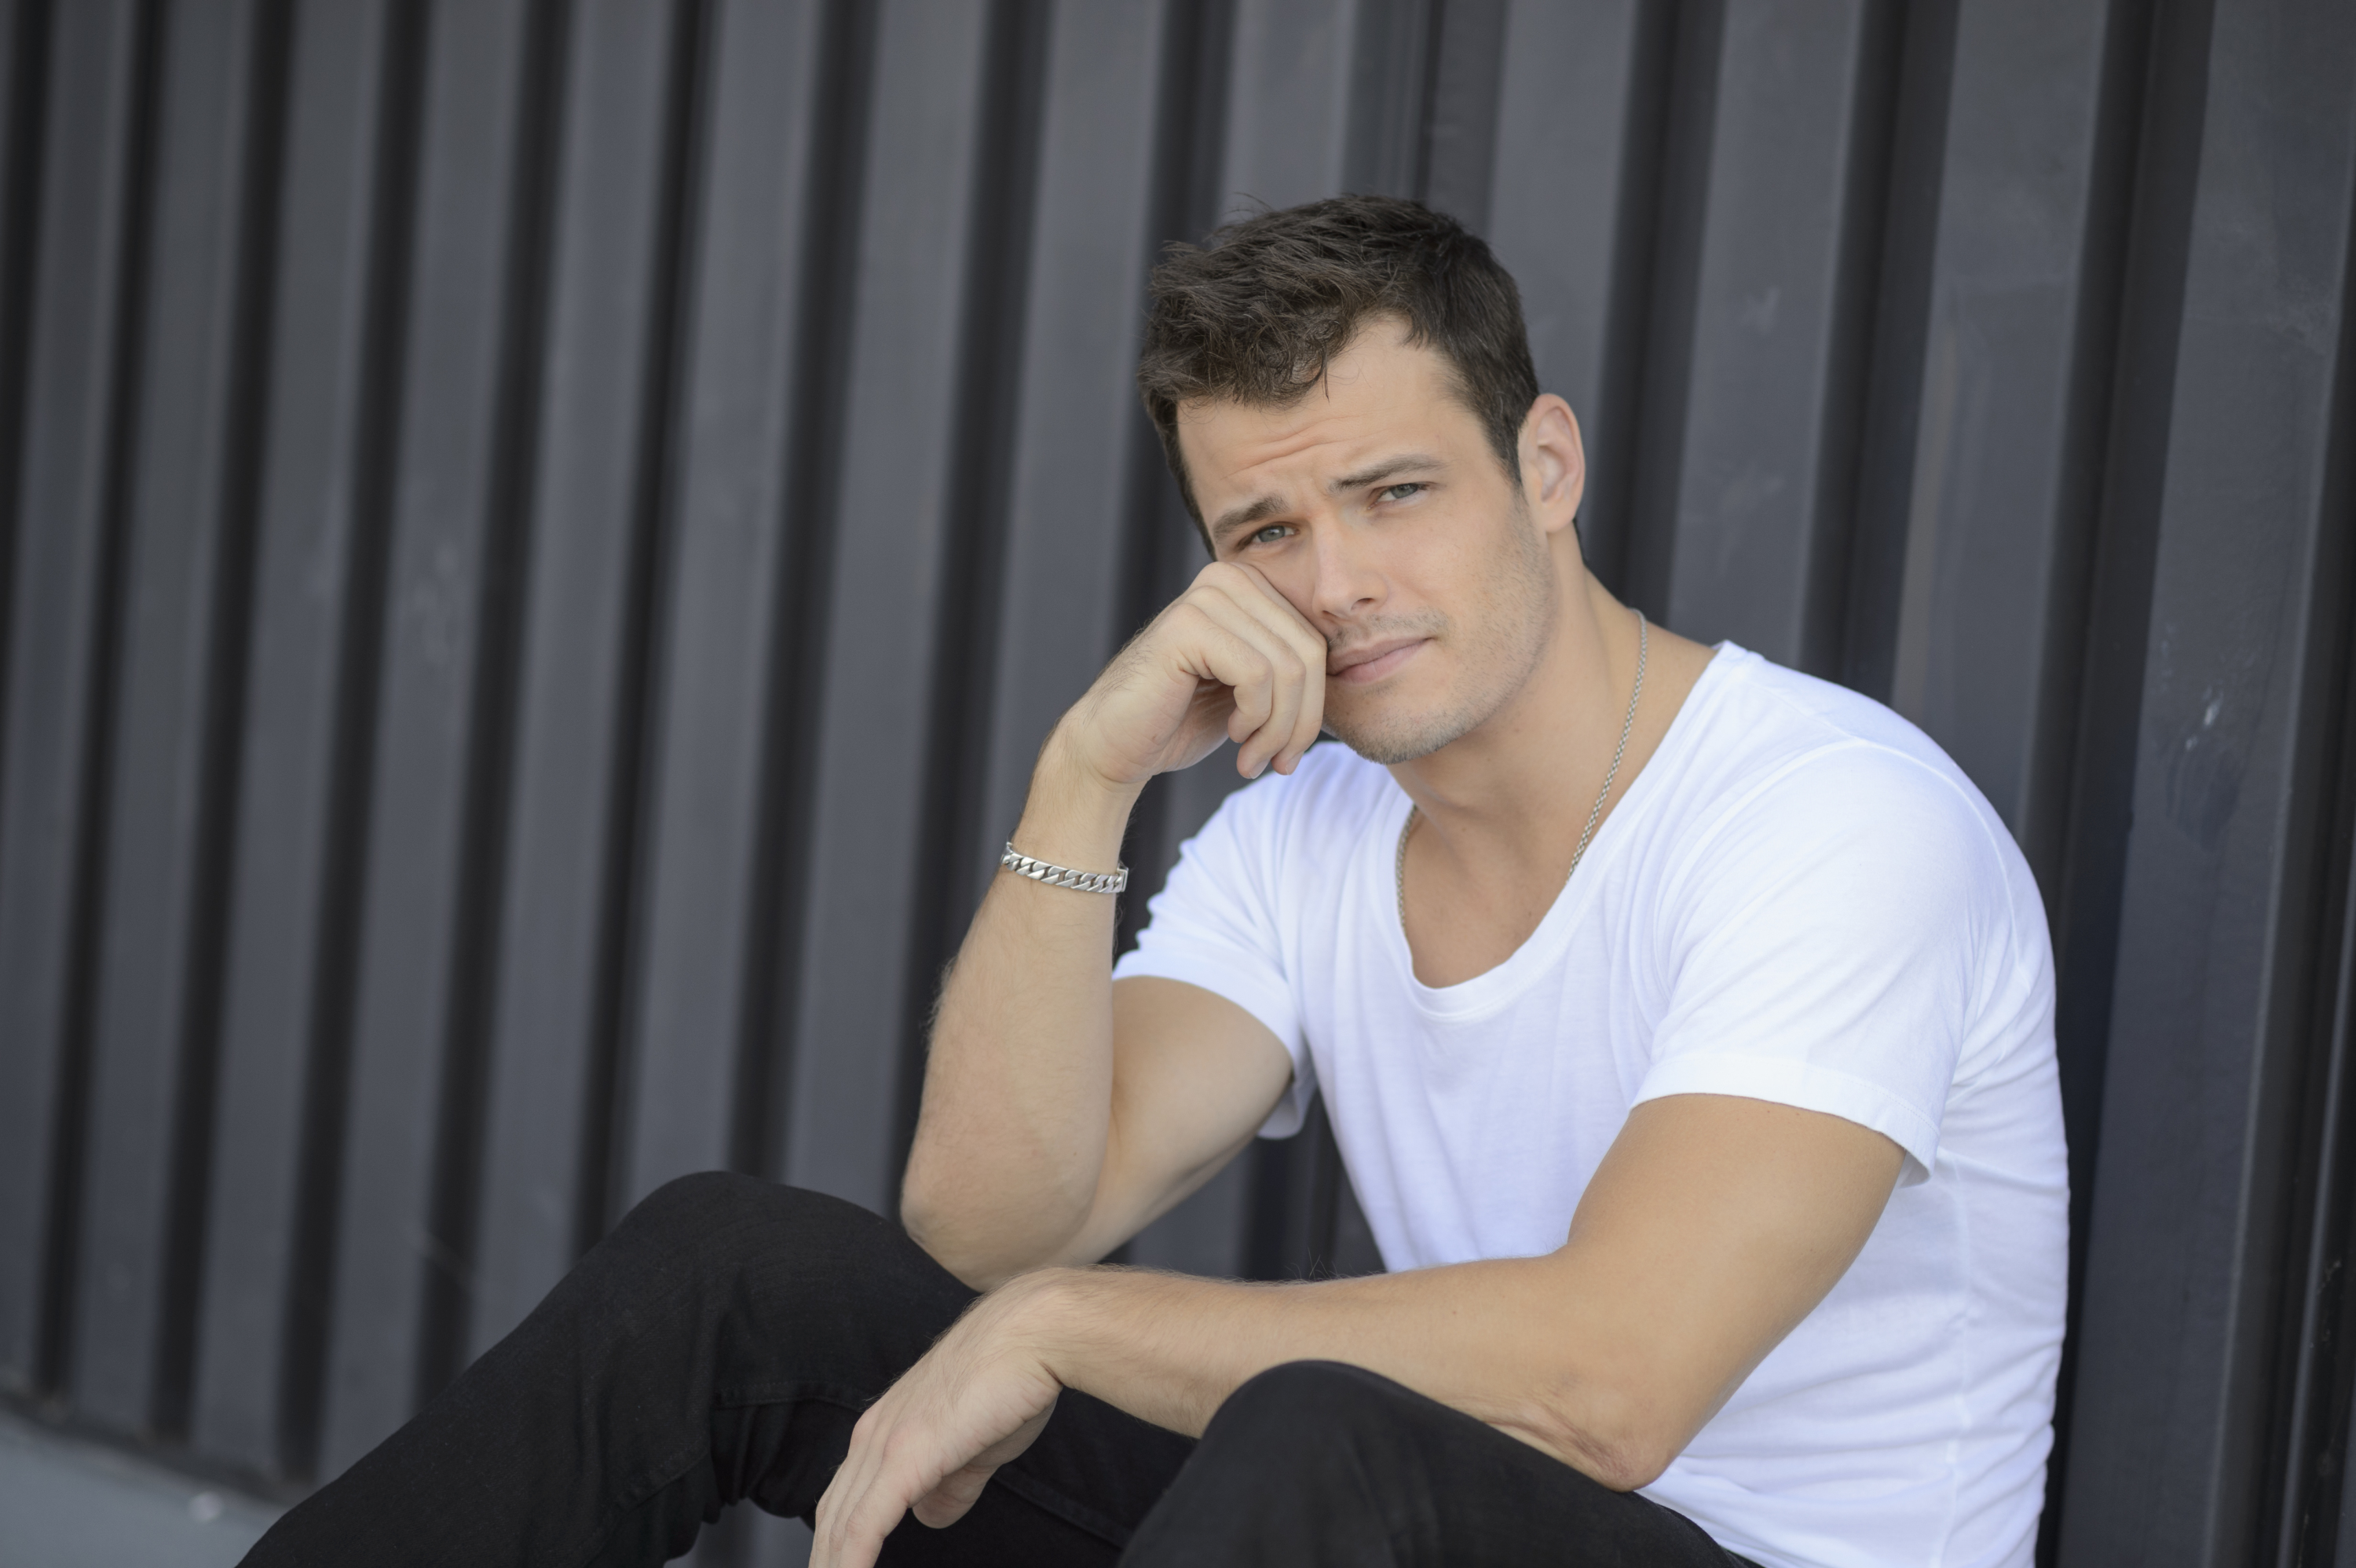 'The Young and the Restless' actor Michael Mealor wearing a white shirt and black pants; sits against a building.